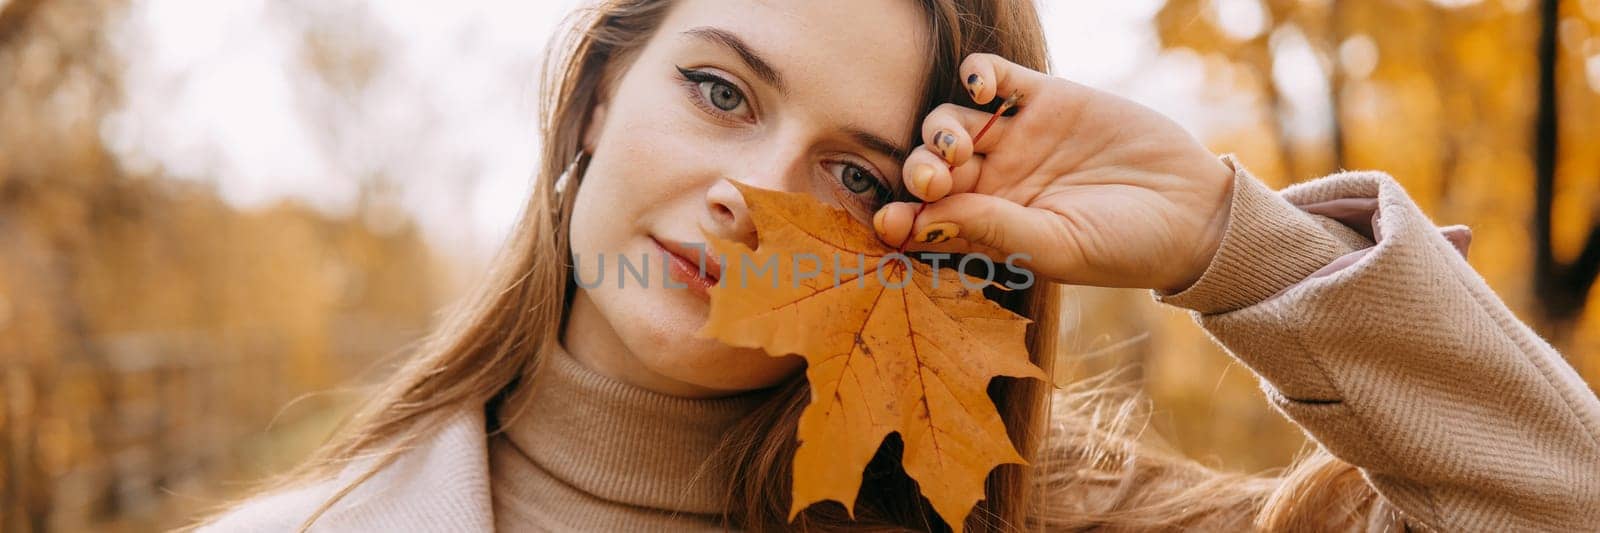 Portrait of a woman with an autumn maple leaf. Railway, autumn leaves, a young long-haired woman in a light coat coat, close-up.